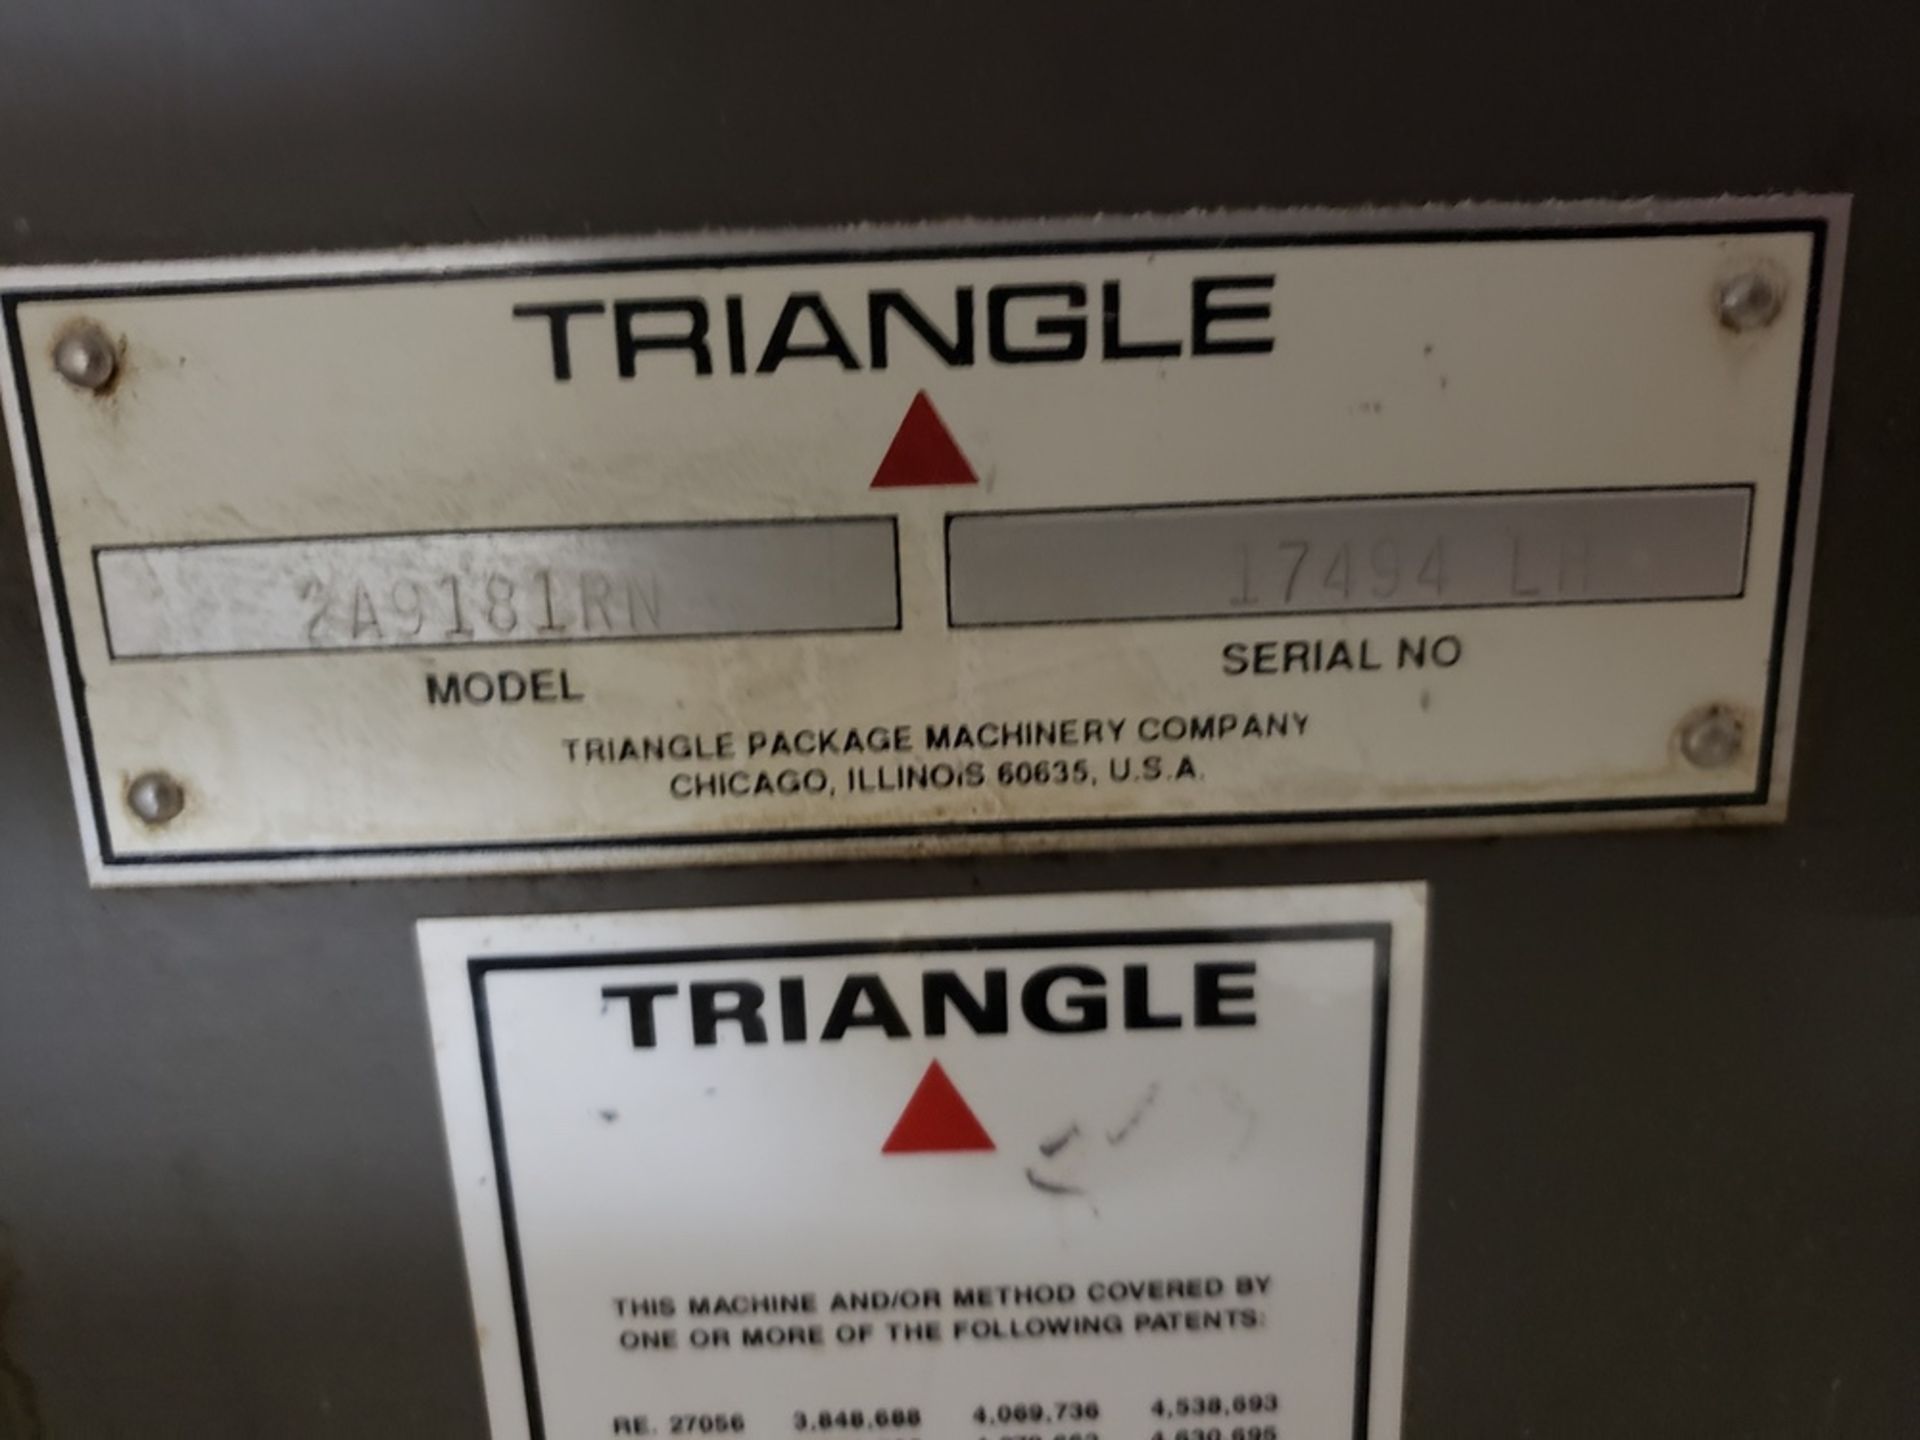 Triangle 9 Pocket Feeder Scale, M# 2A9181RN, S/N 17494LH - Subject to Bulk Clo | Rig Fee: $500 - Image 2 of 4